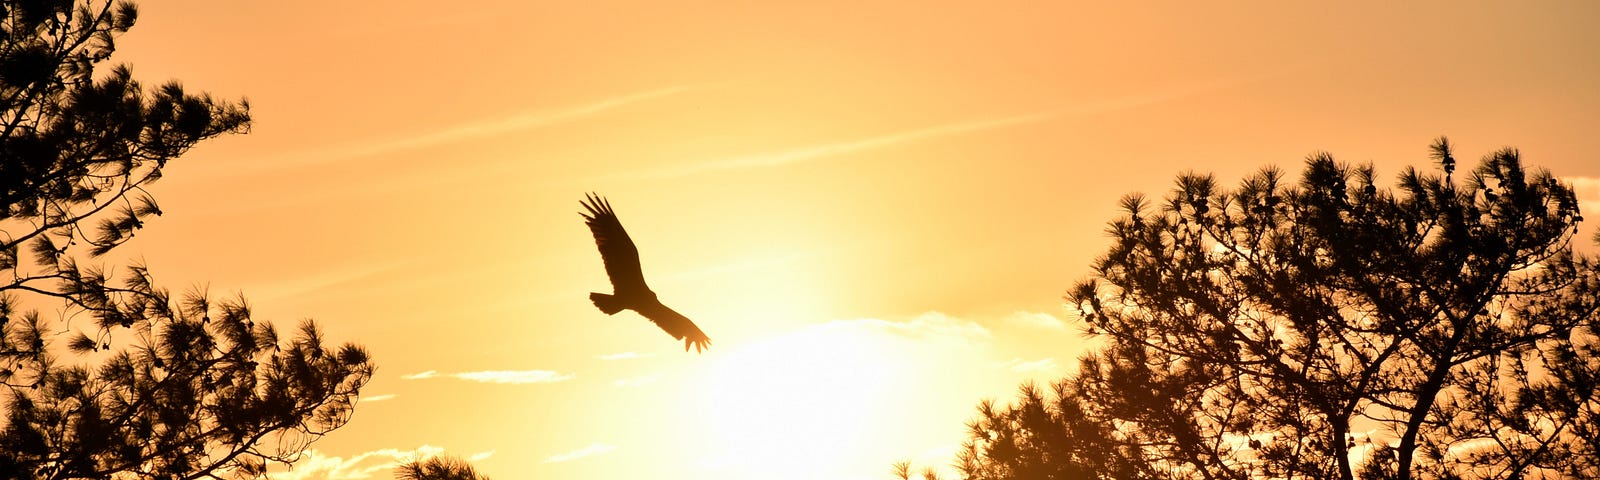 An eagle glides in a bright orange and yellow sky between the silhouette of two trees